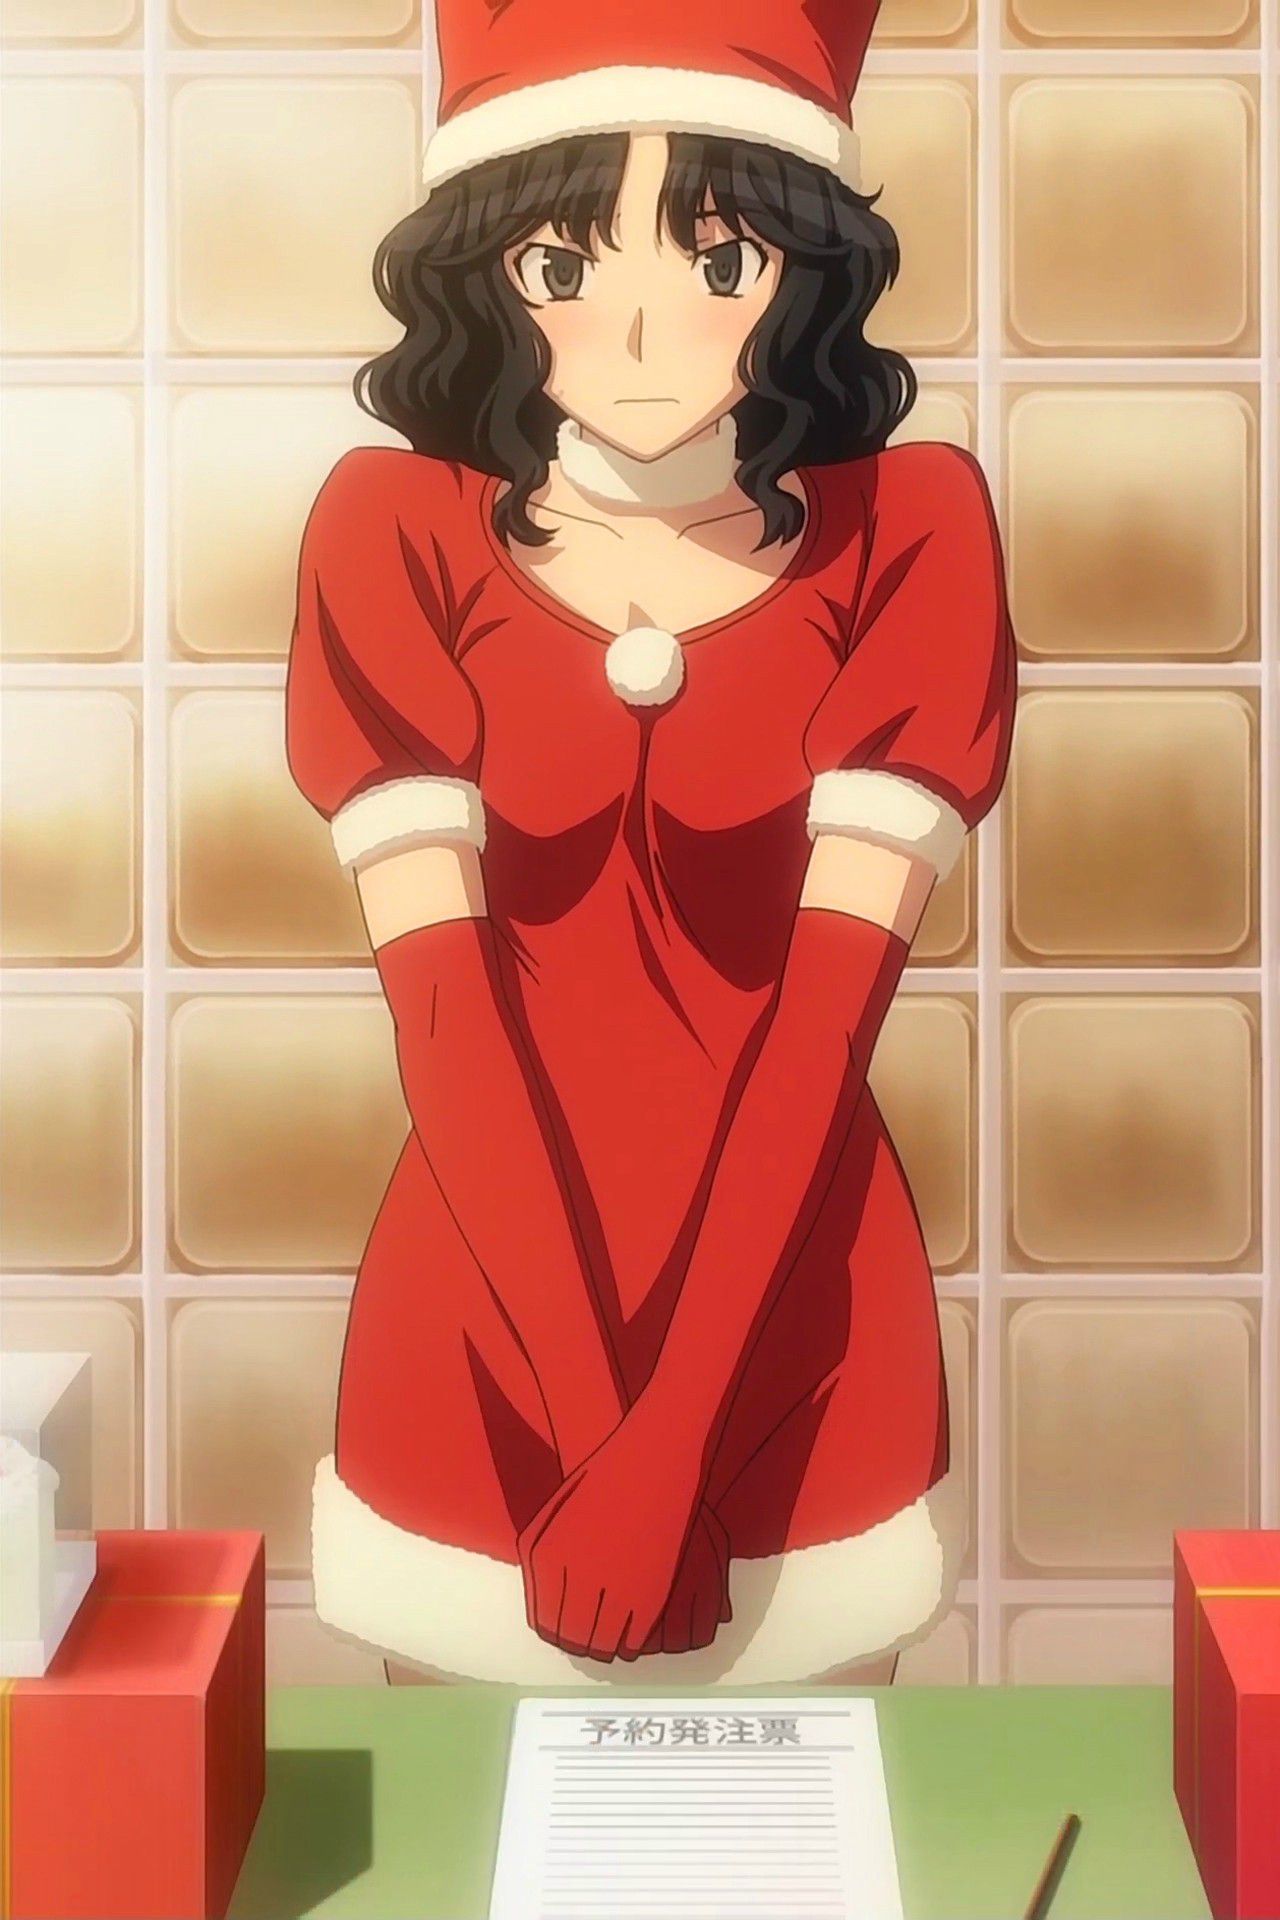 Cute characters "amagami" transcendence erotic illustrations images of the wwwwwww 38